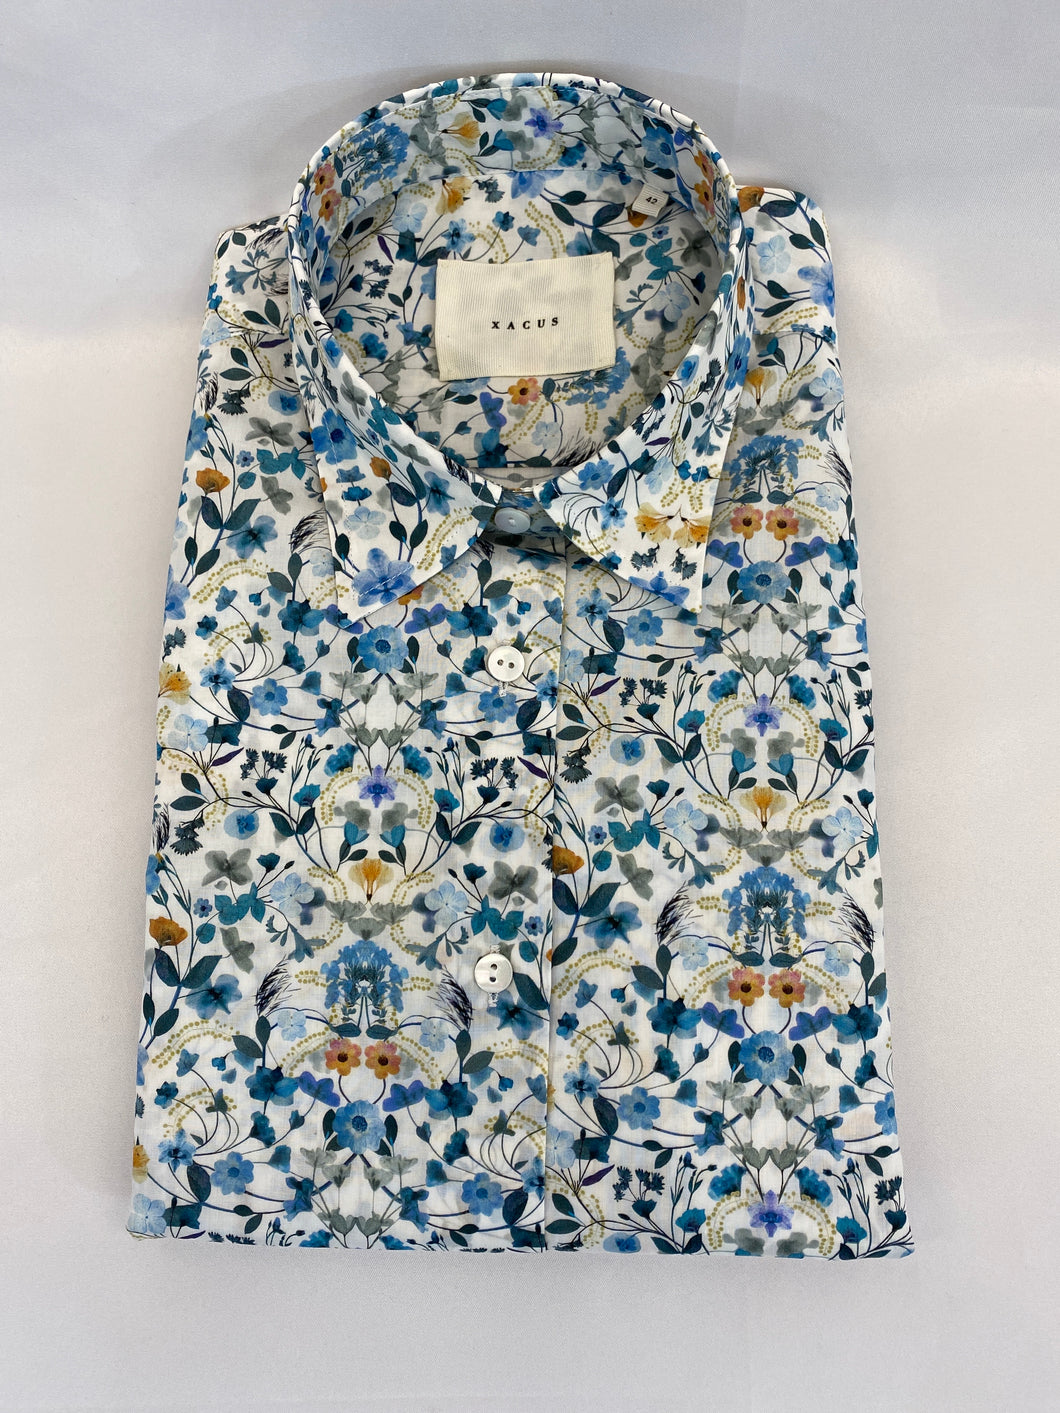 Xacus Women's Shirt White with Blue Floral